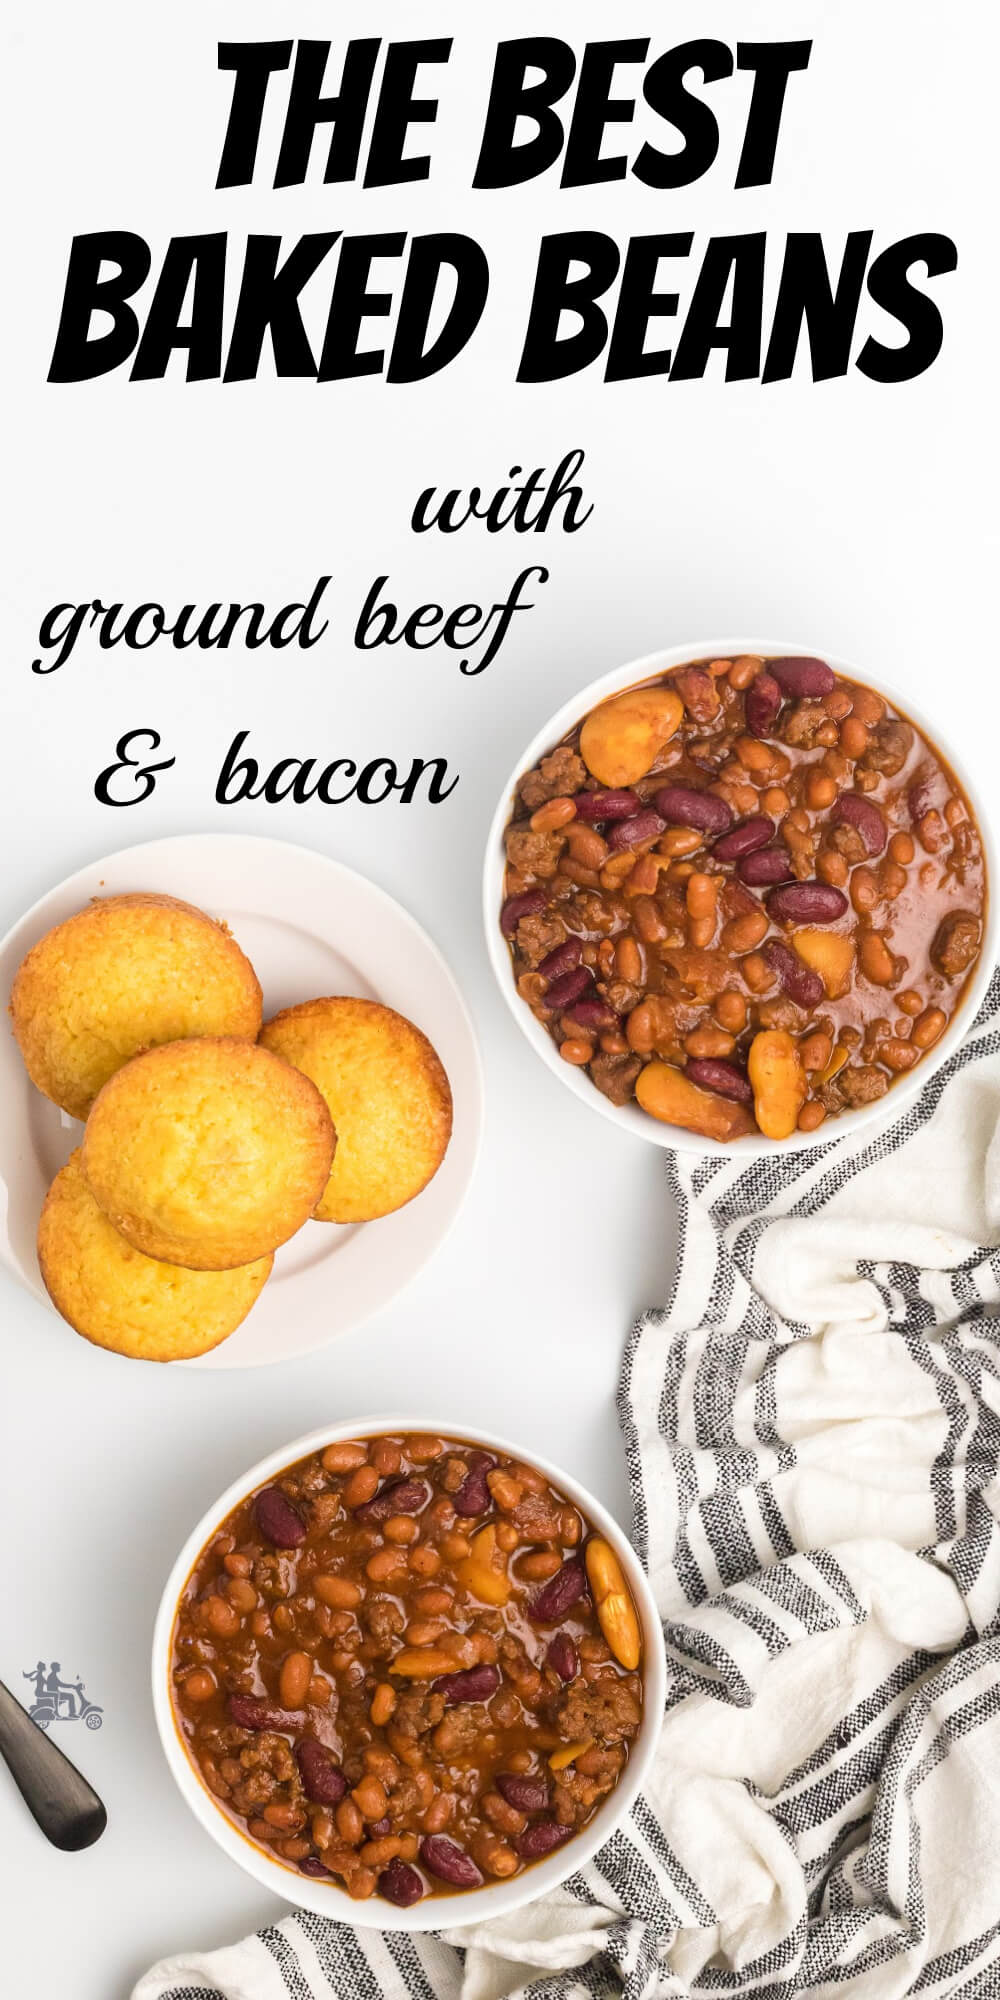 We all love our ultimate crockpot baked beans. They're the perfect side dish for any summer BBQ or picnic. But if you're looking for a way to step up your bean game, look no further than this recipe for Slow Cooker Baked Beans with the addition of hamburger and bacon.